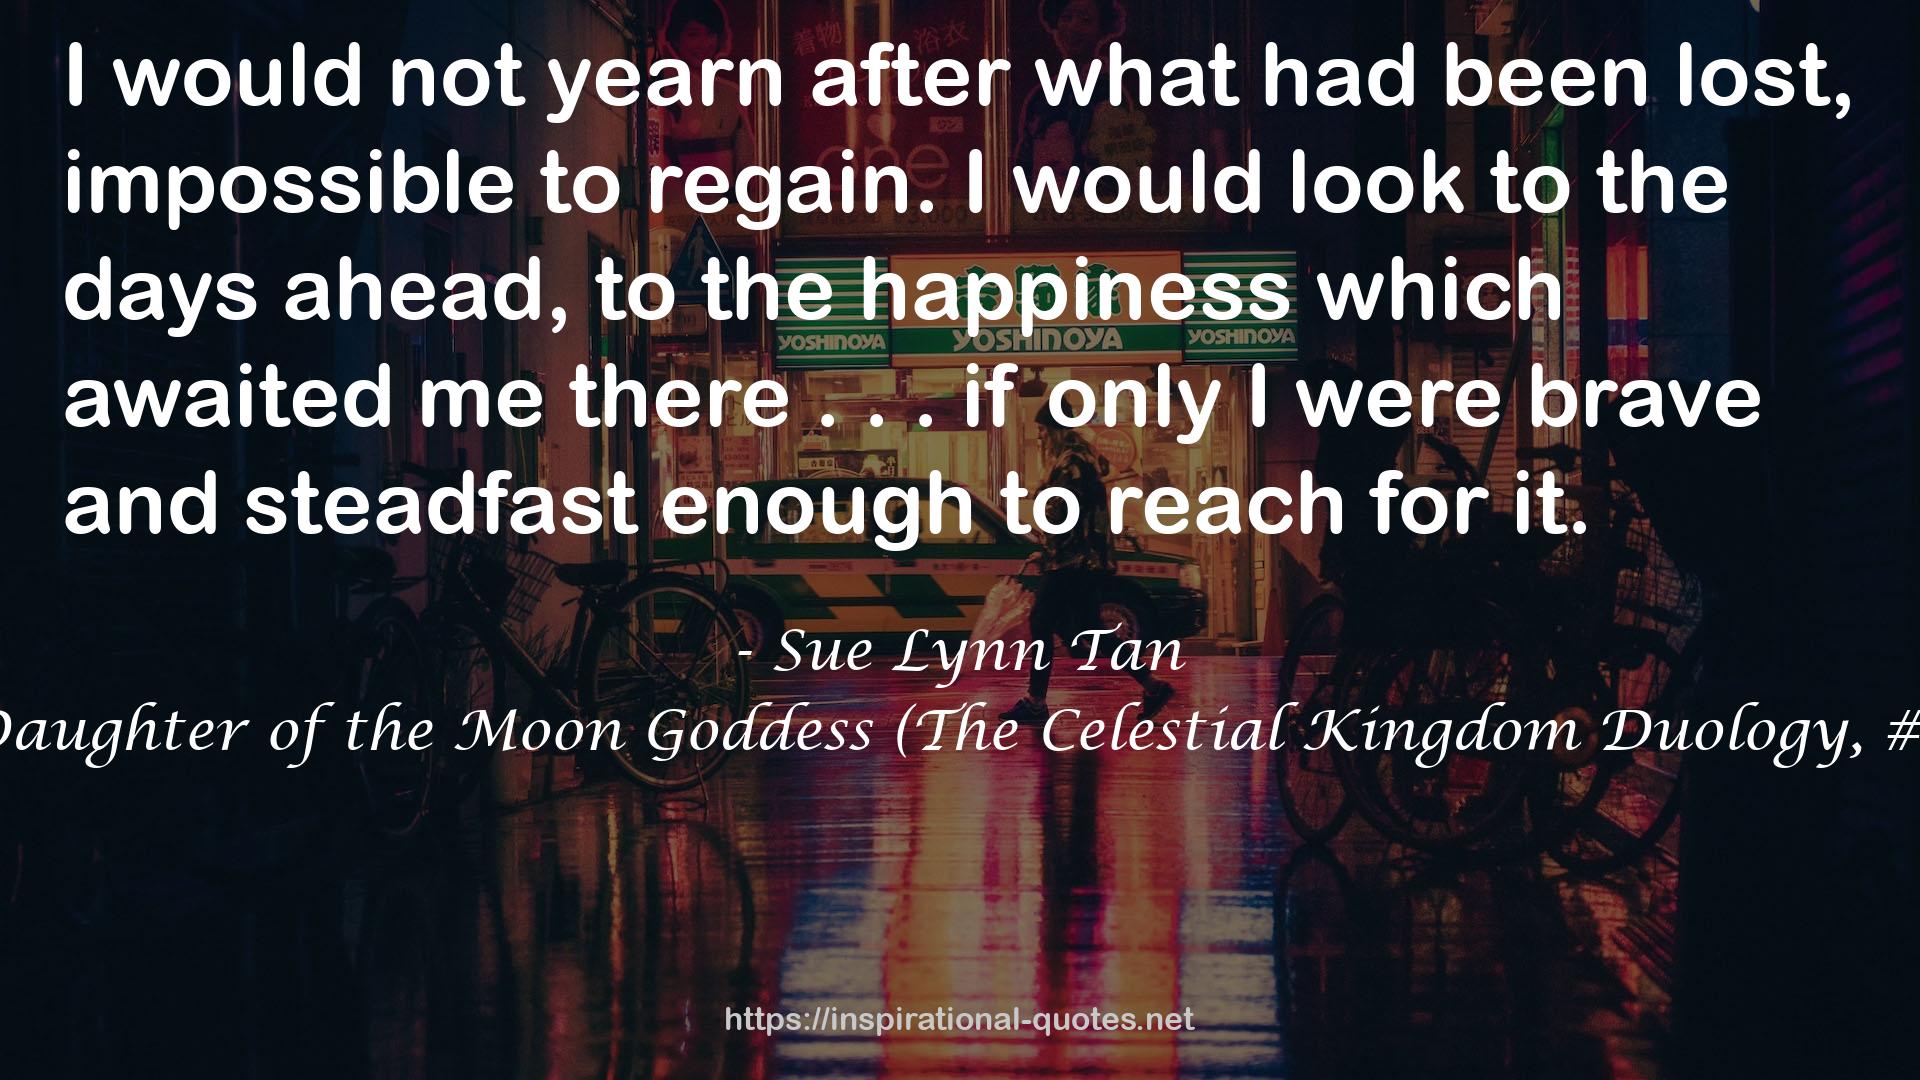 Daughter of the Moon Goddess (The Celestial Kingdom Duology, #1) QUOTES